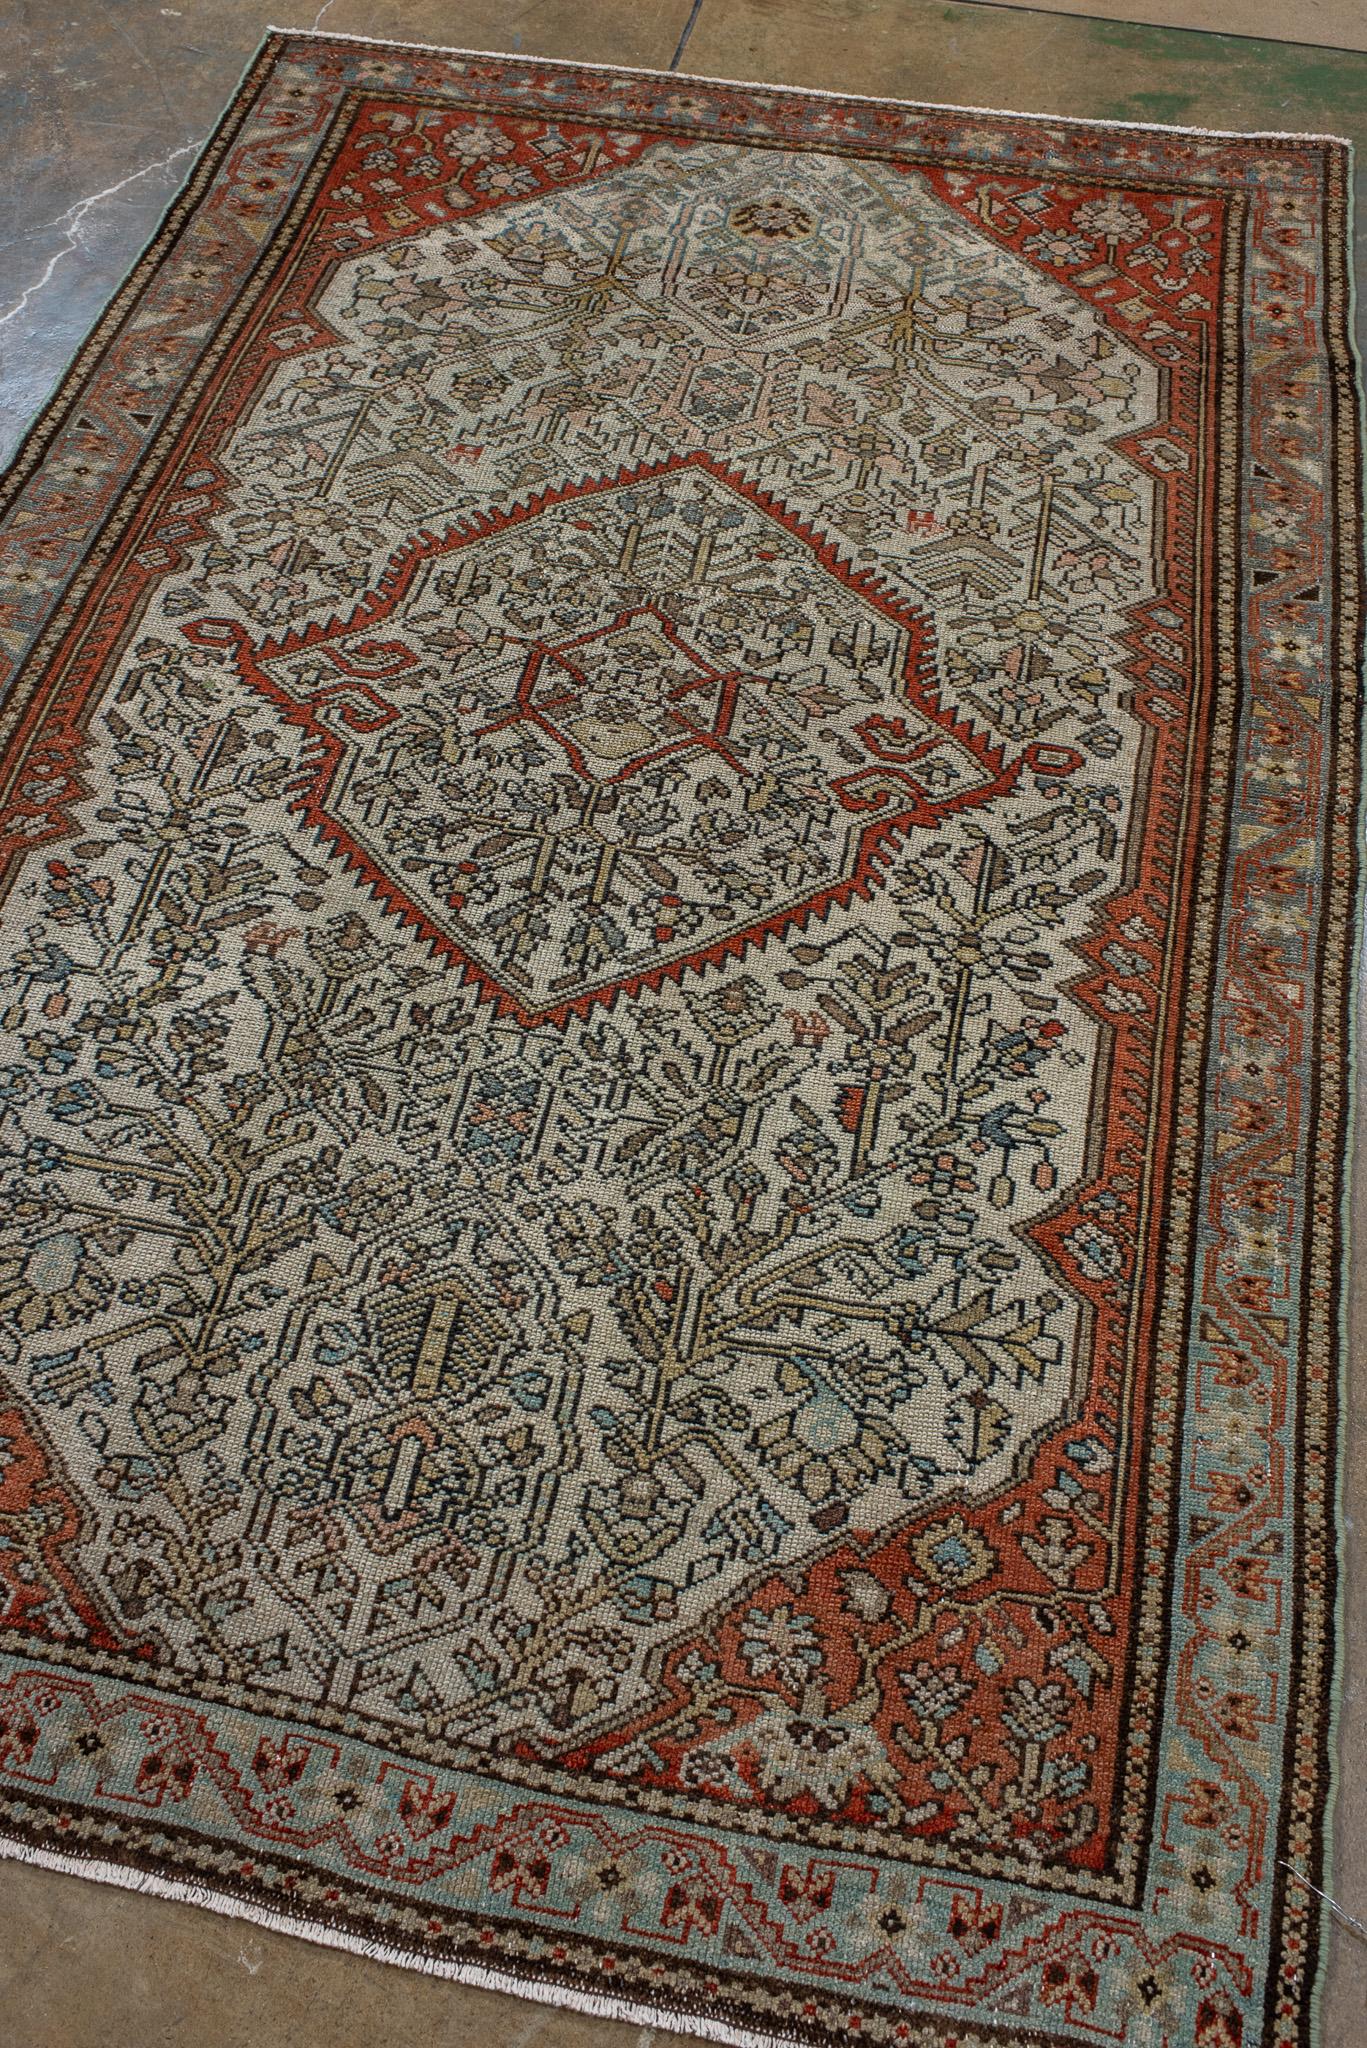 A Malayer Rug circa 1920. Handknotted with 100% wool yarn.